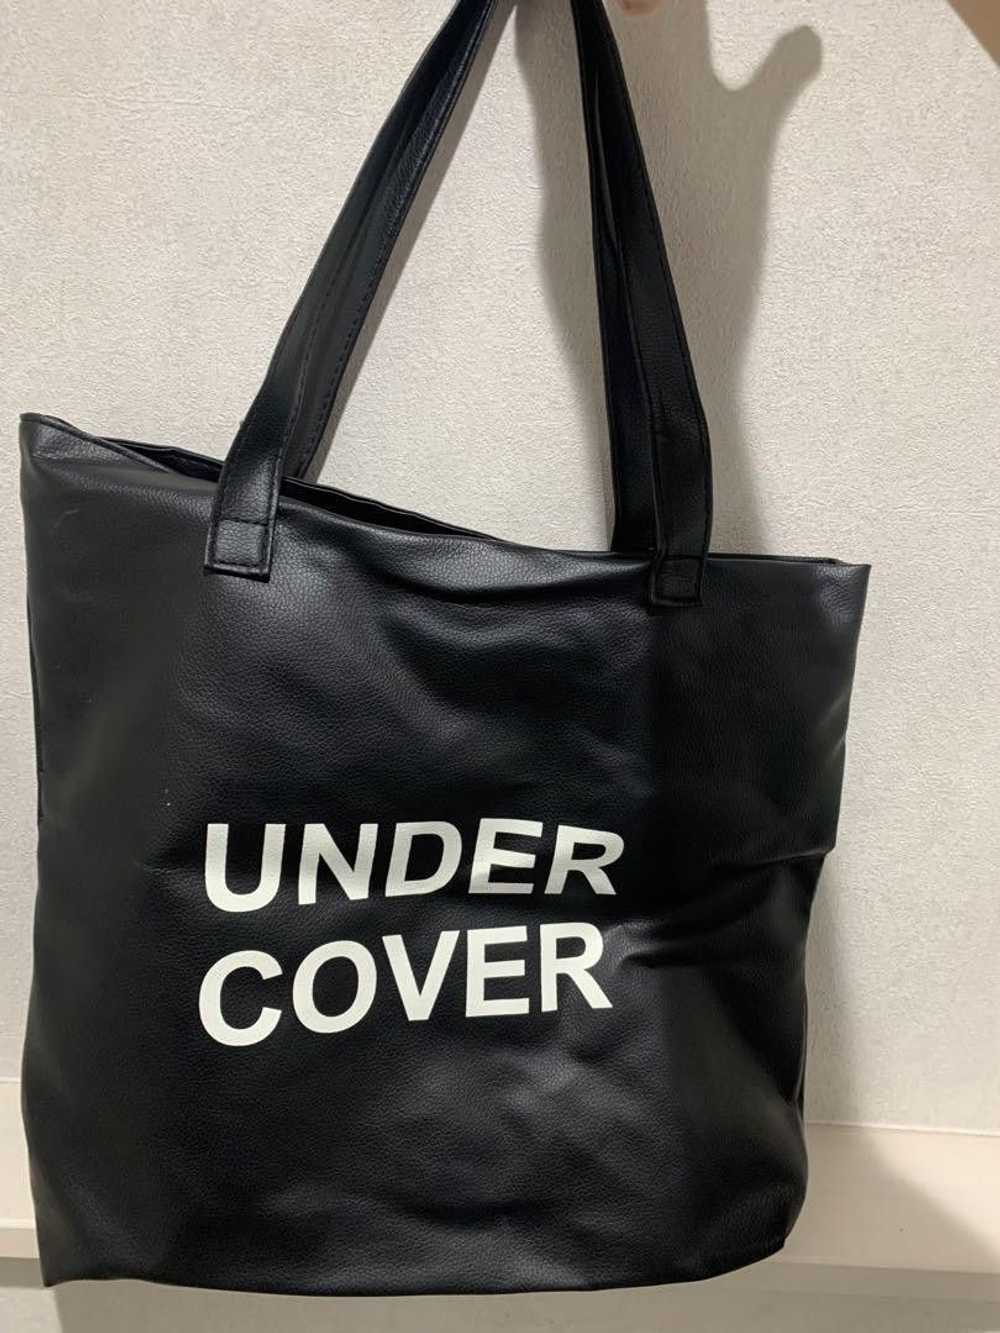 Undercover Logo Tote Bag - image 1